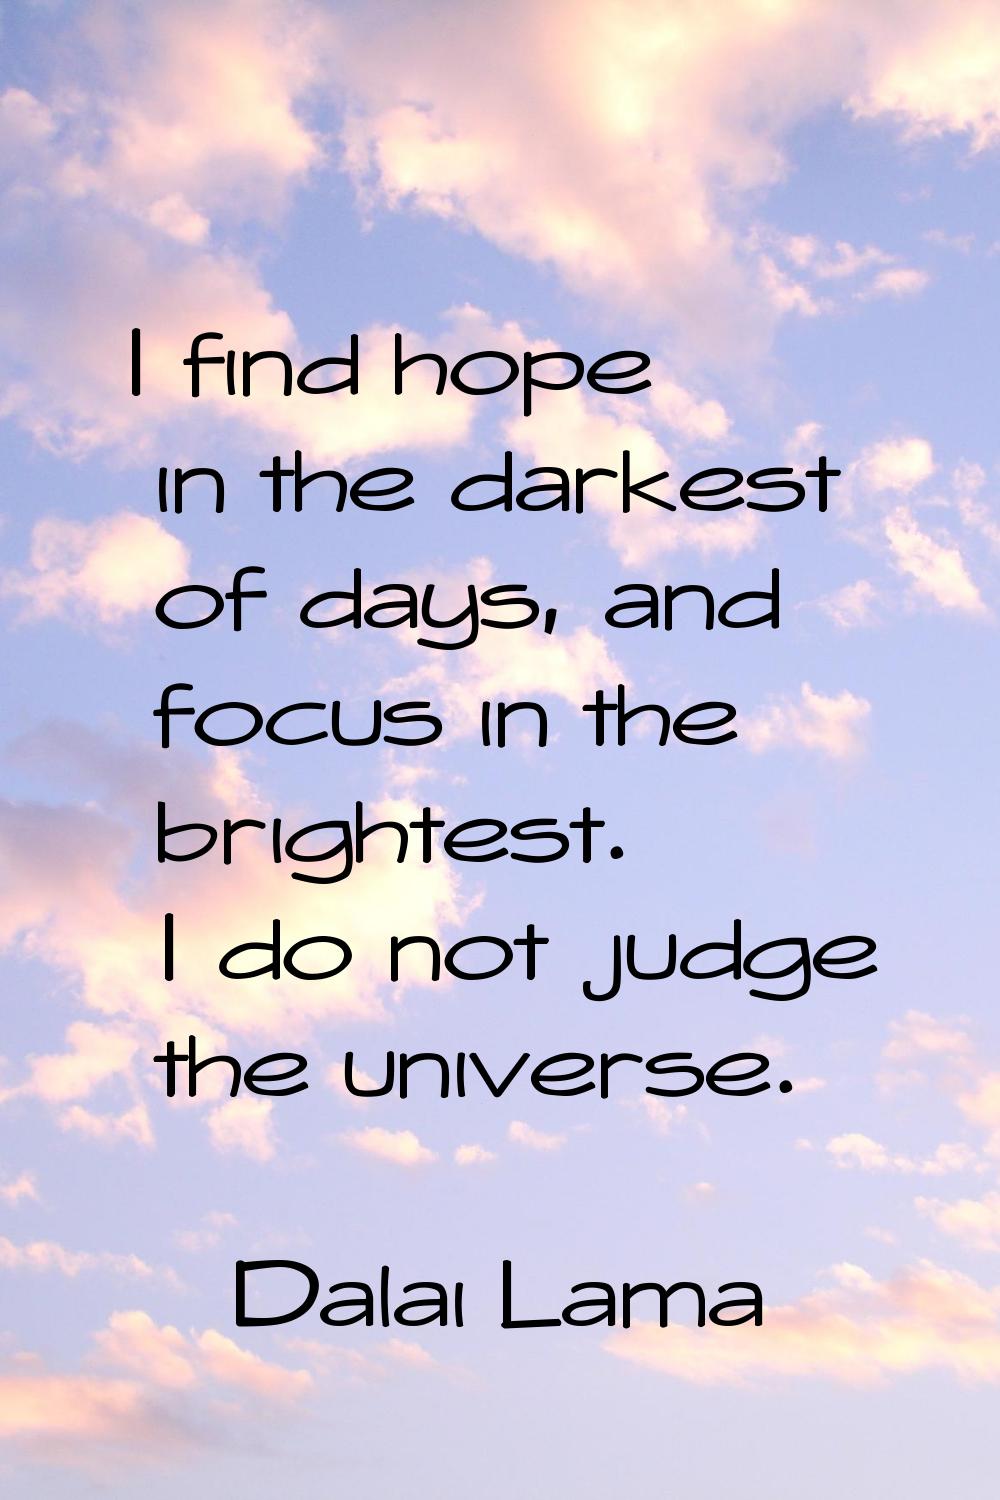 I find hope in the darkest of days, and focus in the brightest. I do not judge the universe.